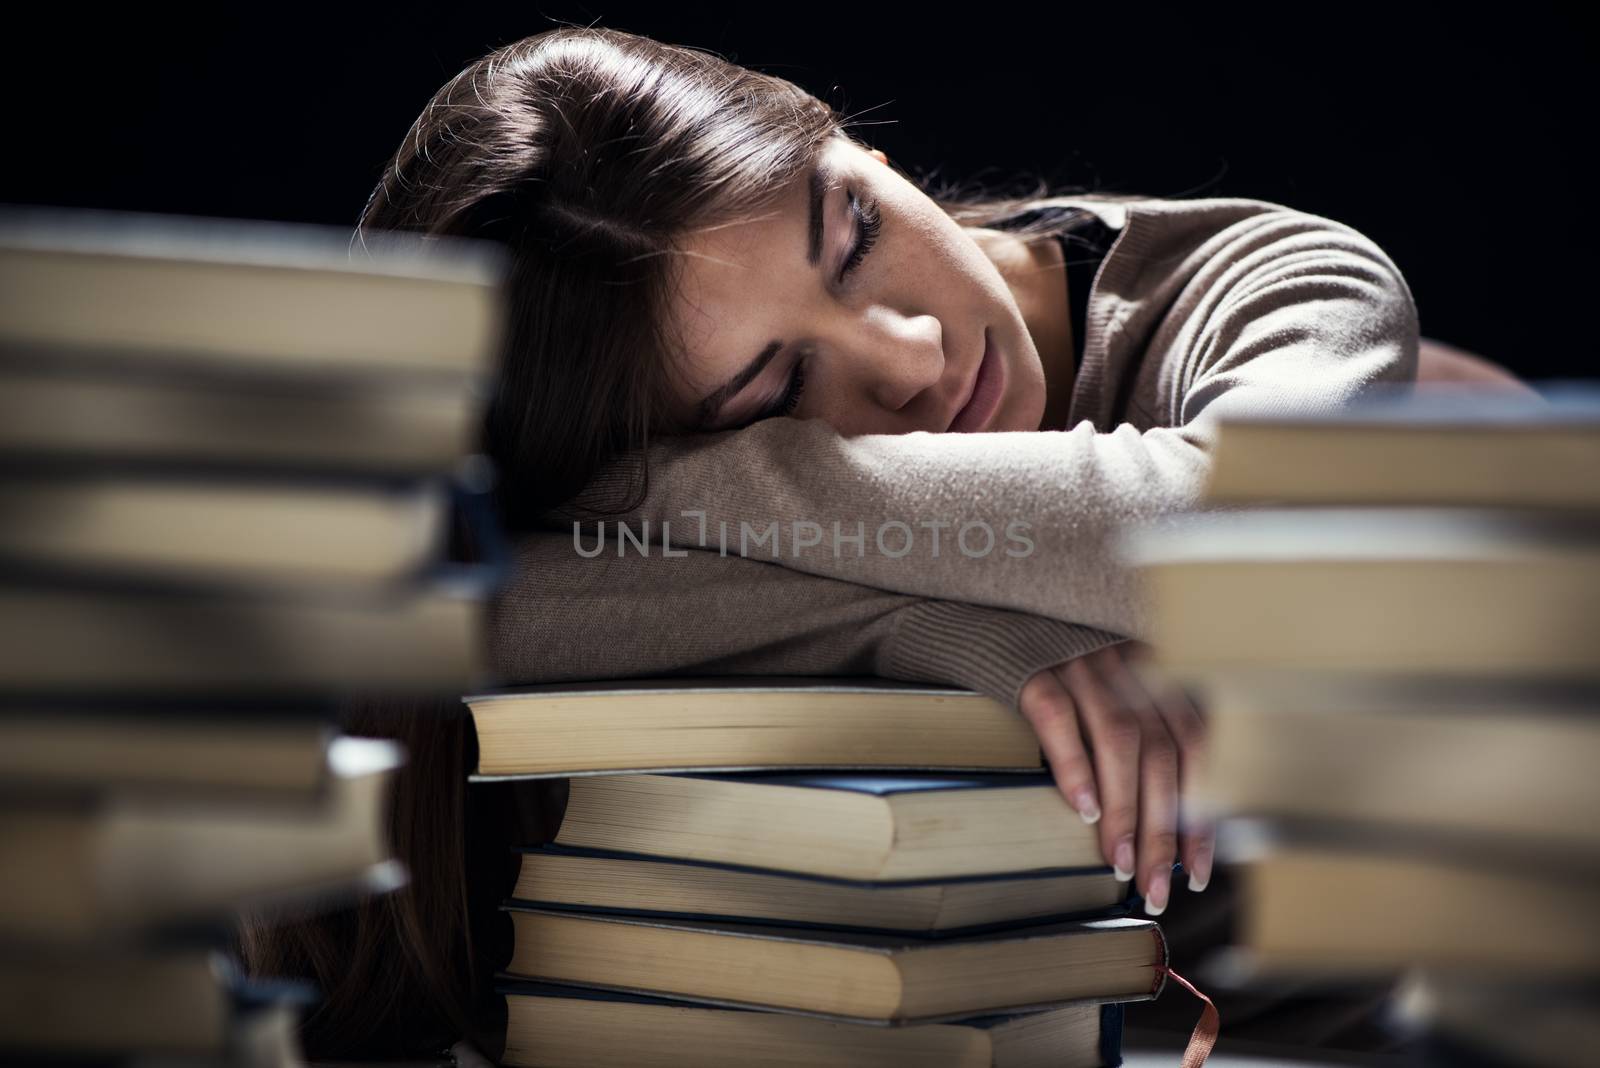 Tired student fell a sleep between many books, while learning. Selective focus.